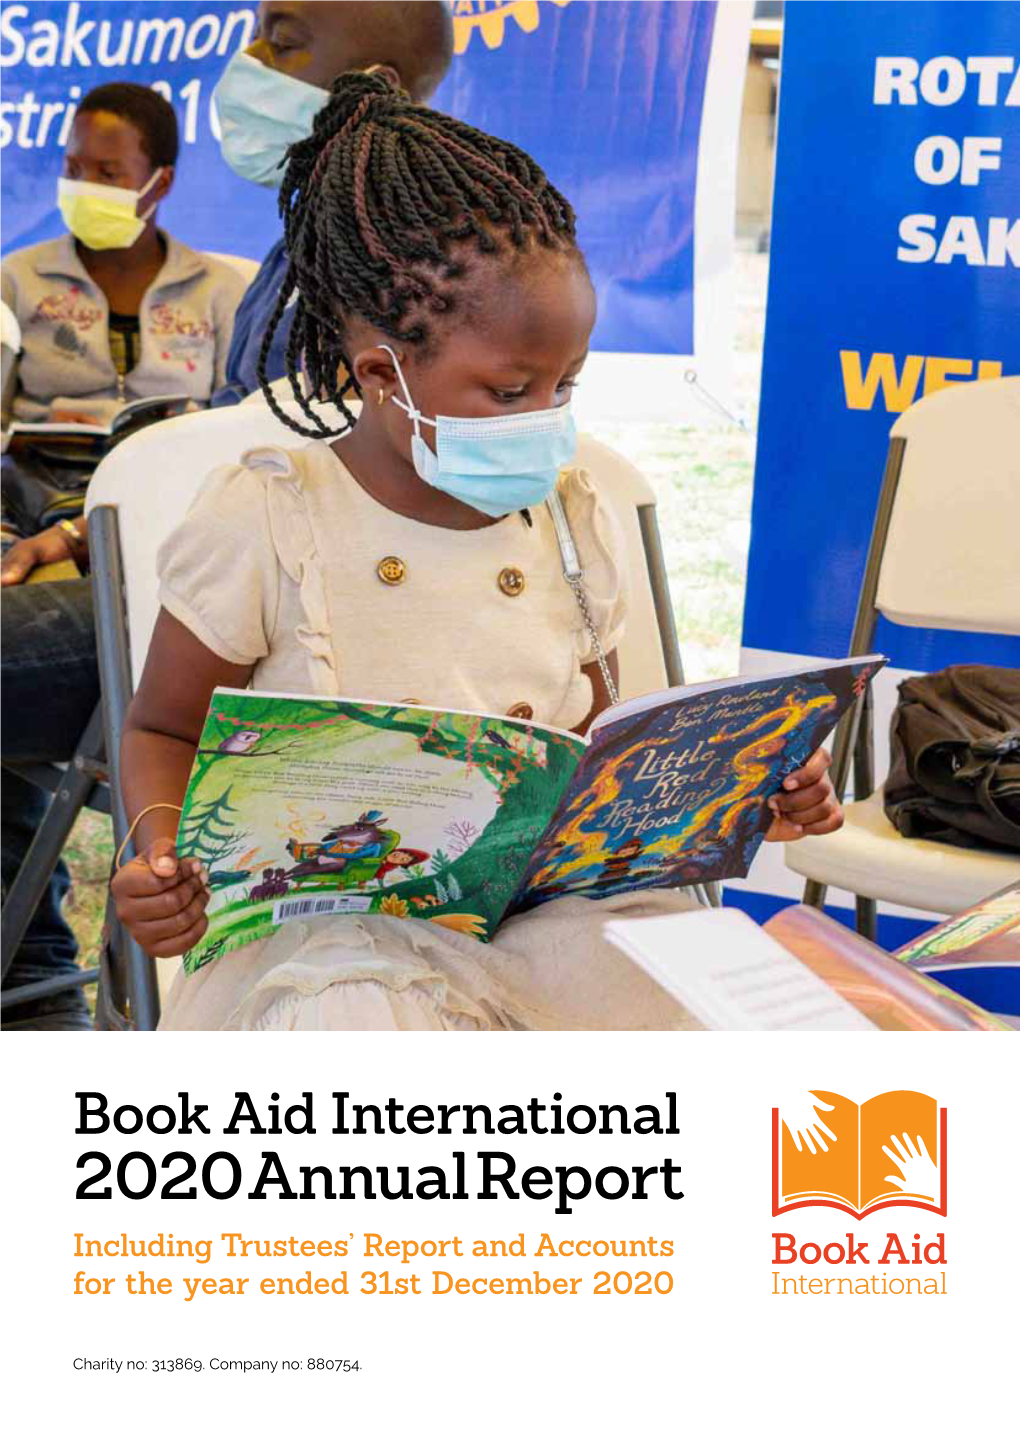 Book Aid International 2020 Annual Report Including Trustees’ Report and Accounts for the Year Ended 31St December 2020